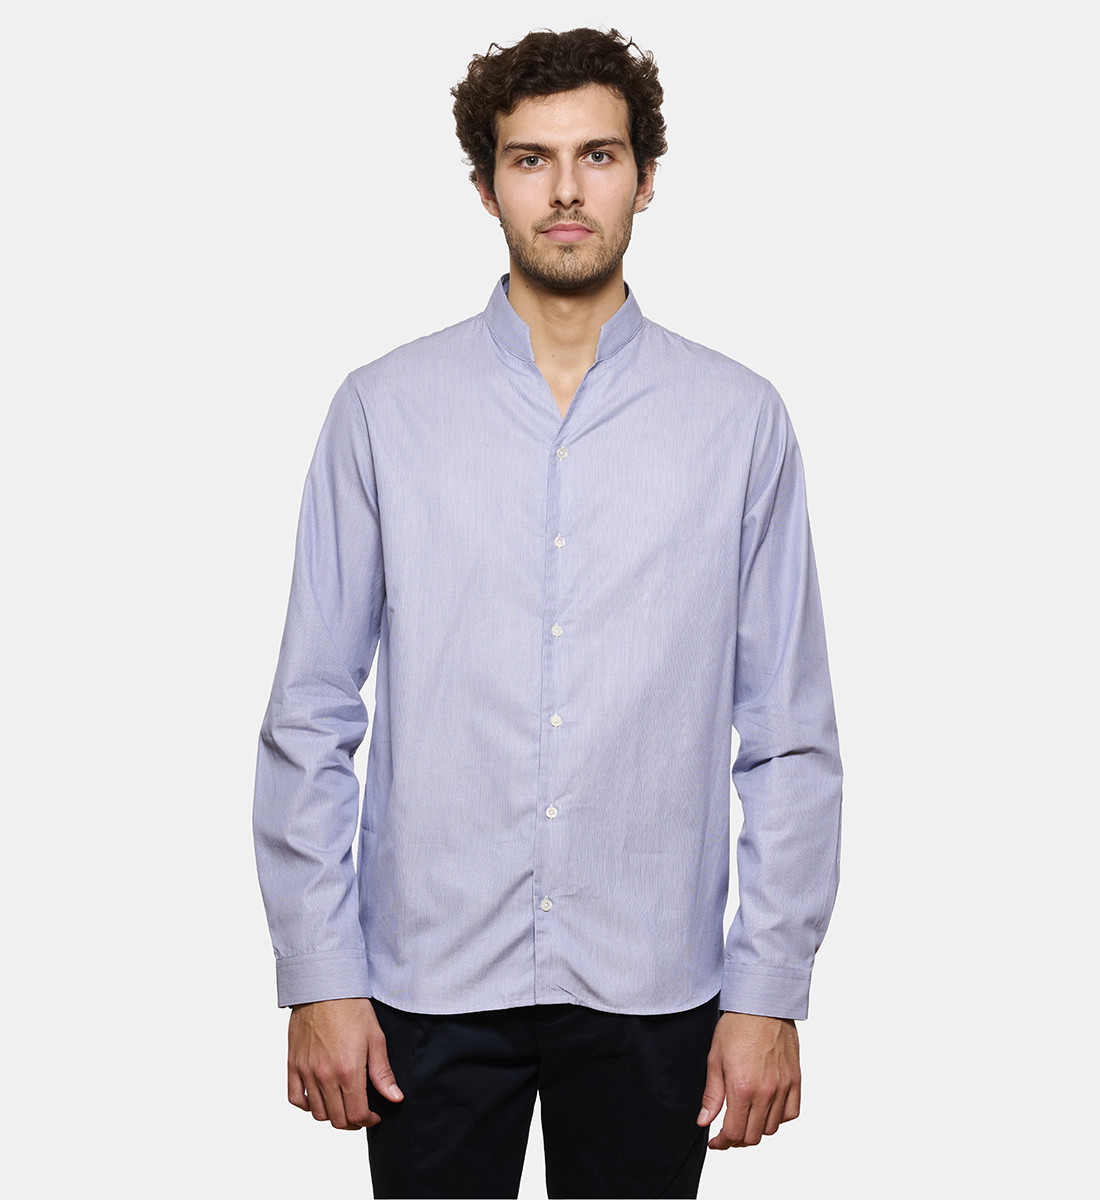 Chemise col chef milleraies marine coupe droite